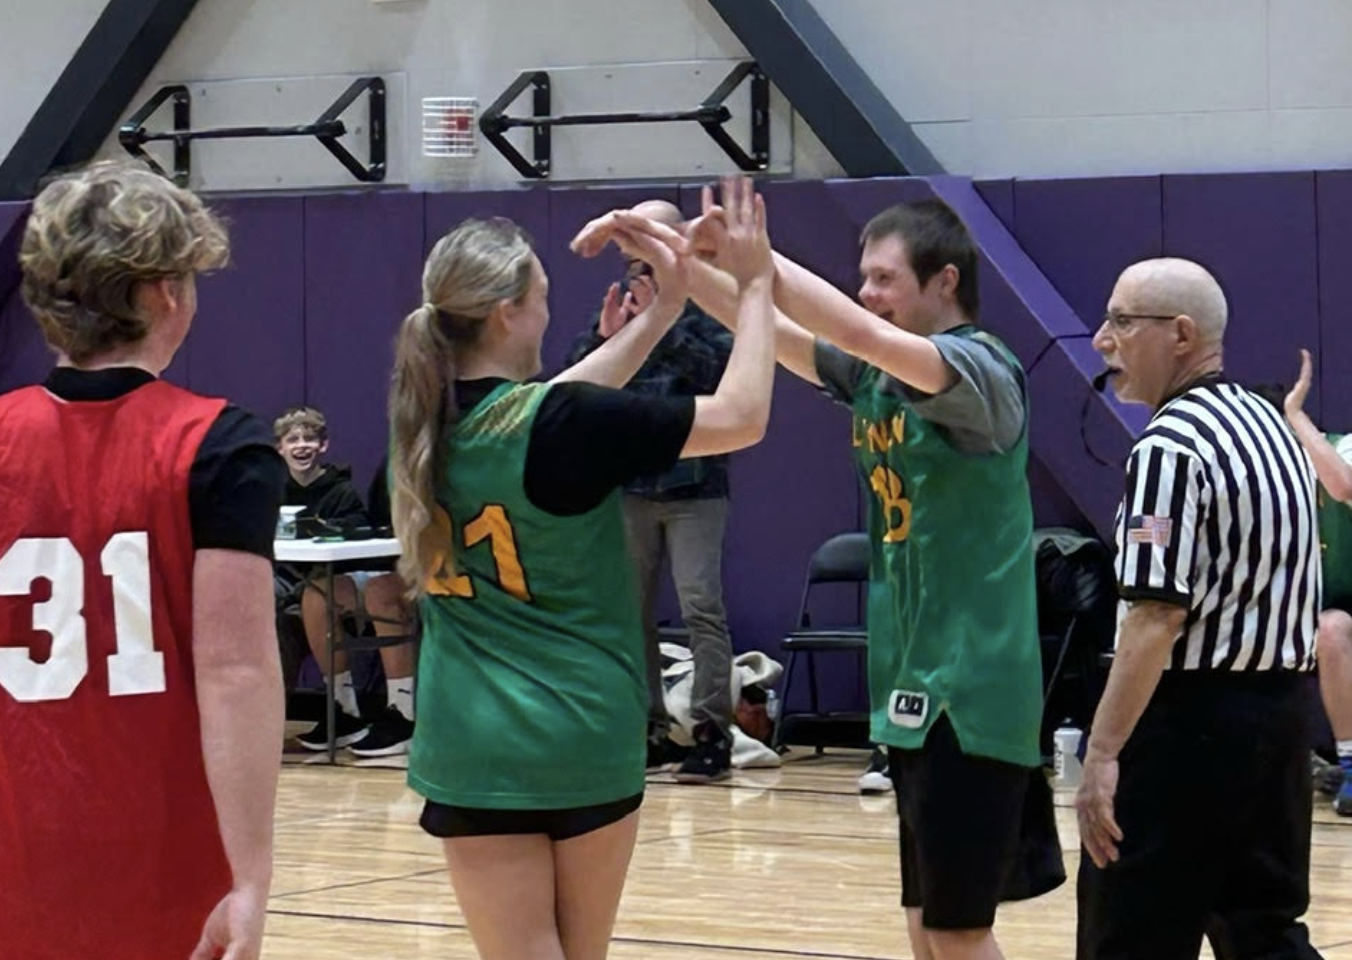 Unified Basketball Brings Students Together for a Fresh Purpose